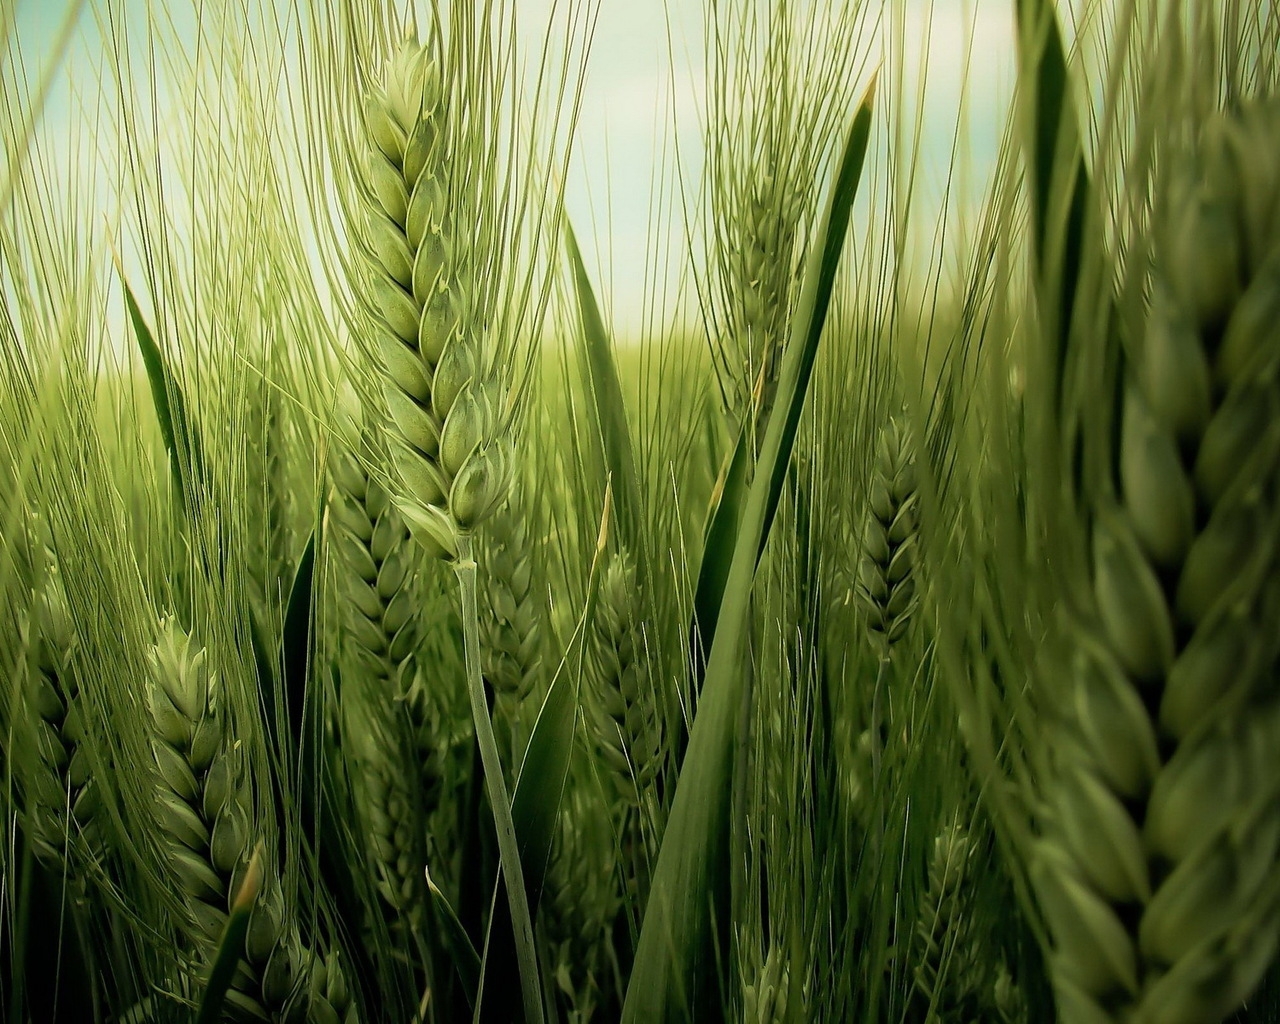 Green Wheat Field for 1280 x 1024 resolution